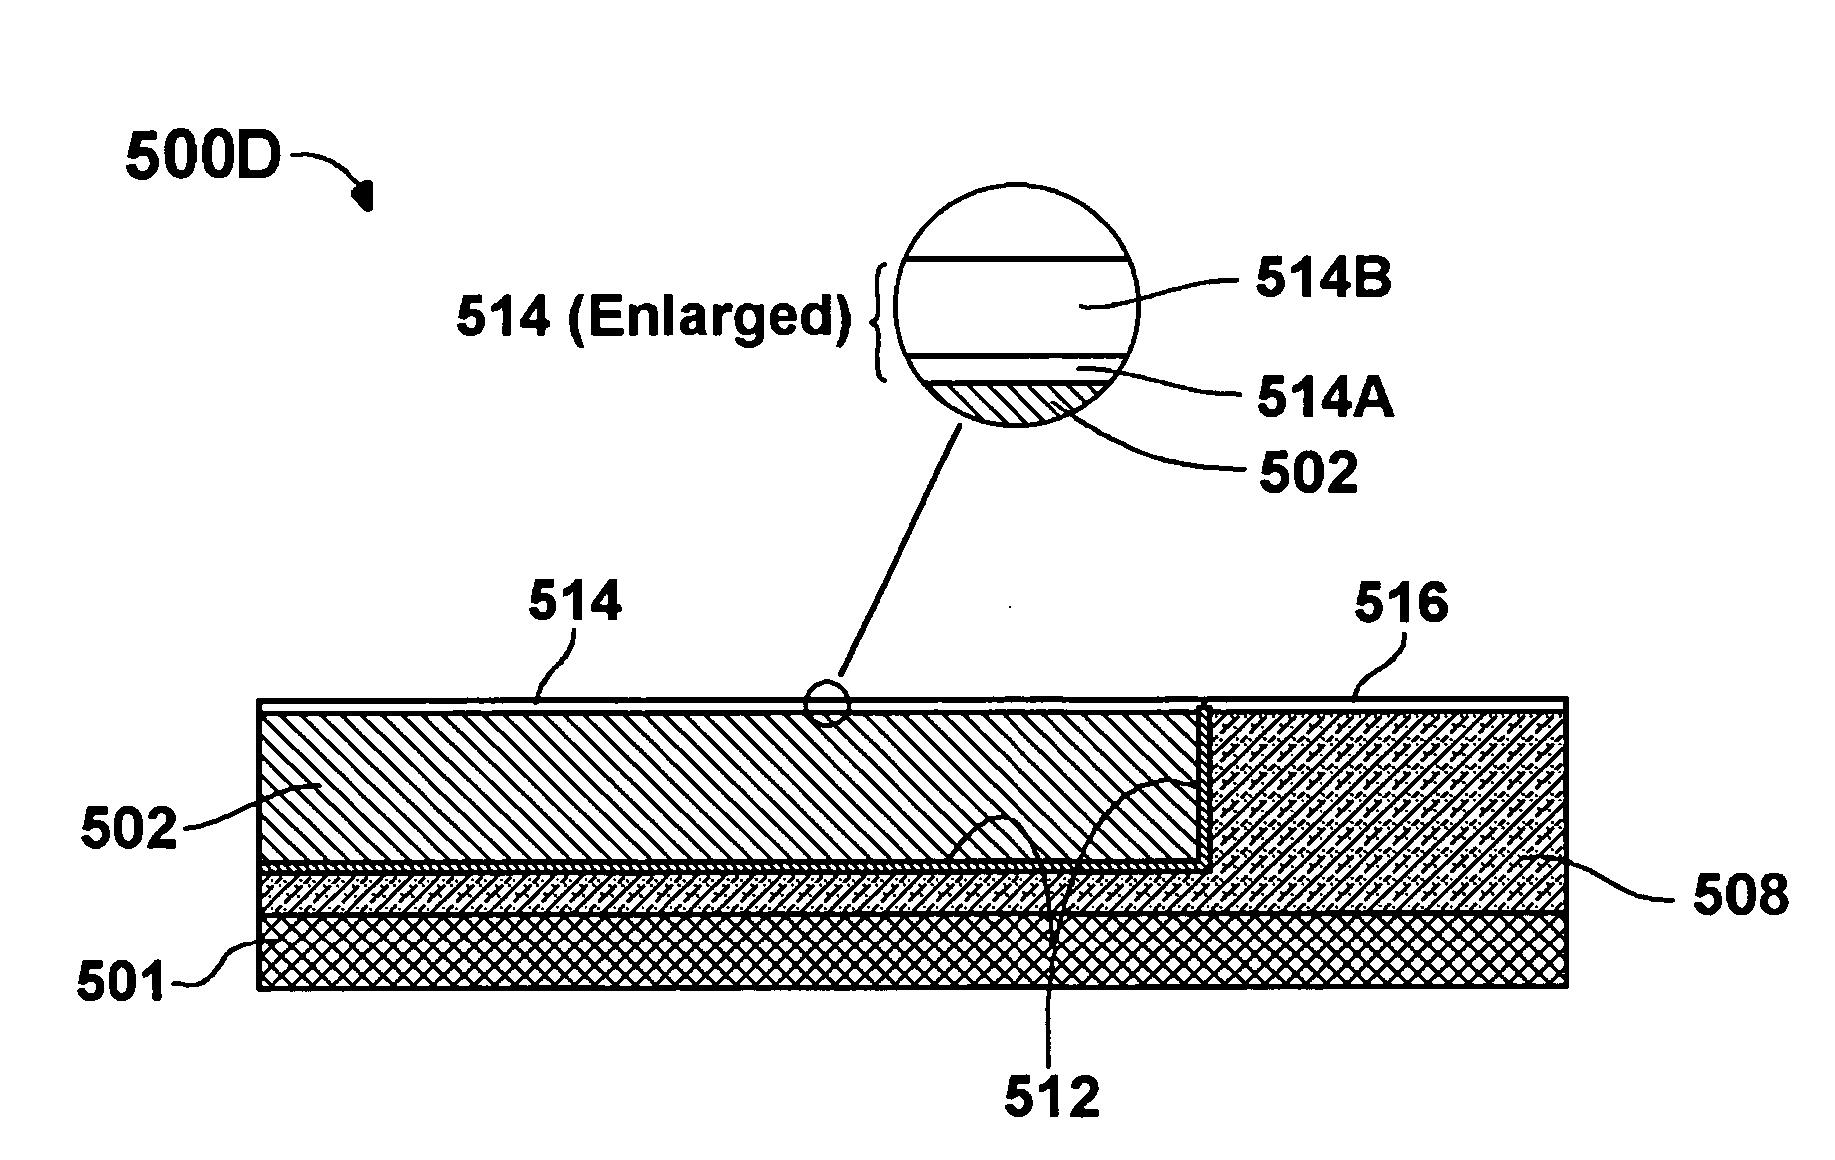 Copper interconnect wiring and method of forming thereof